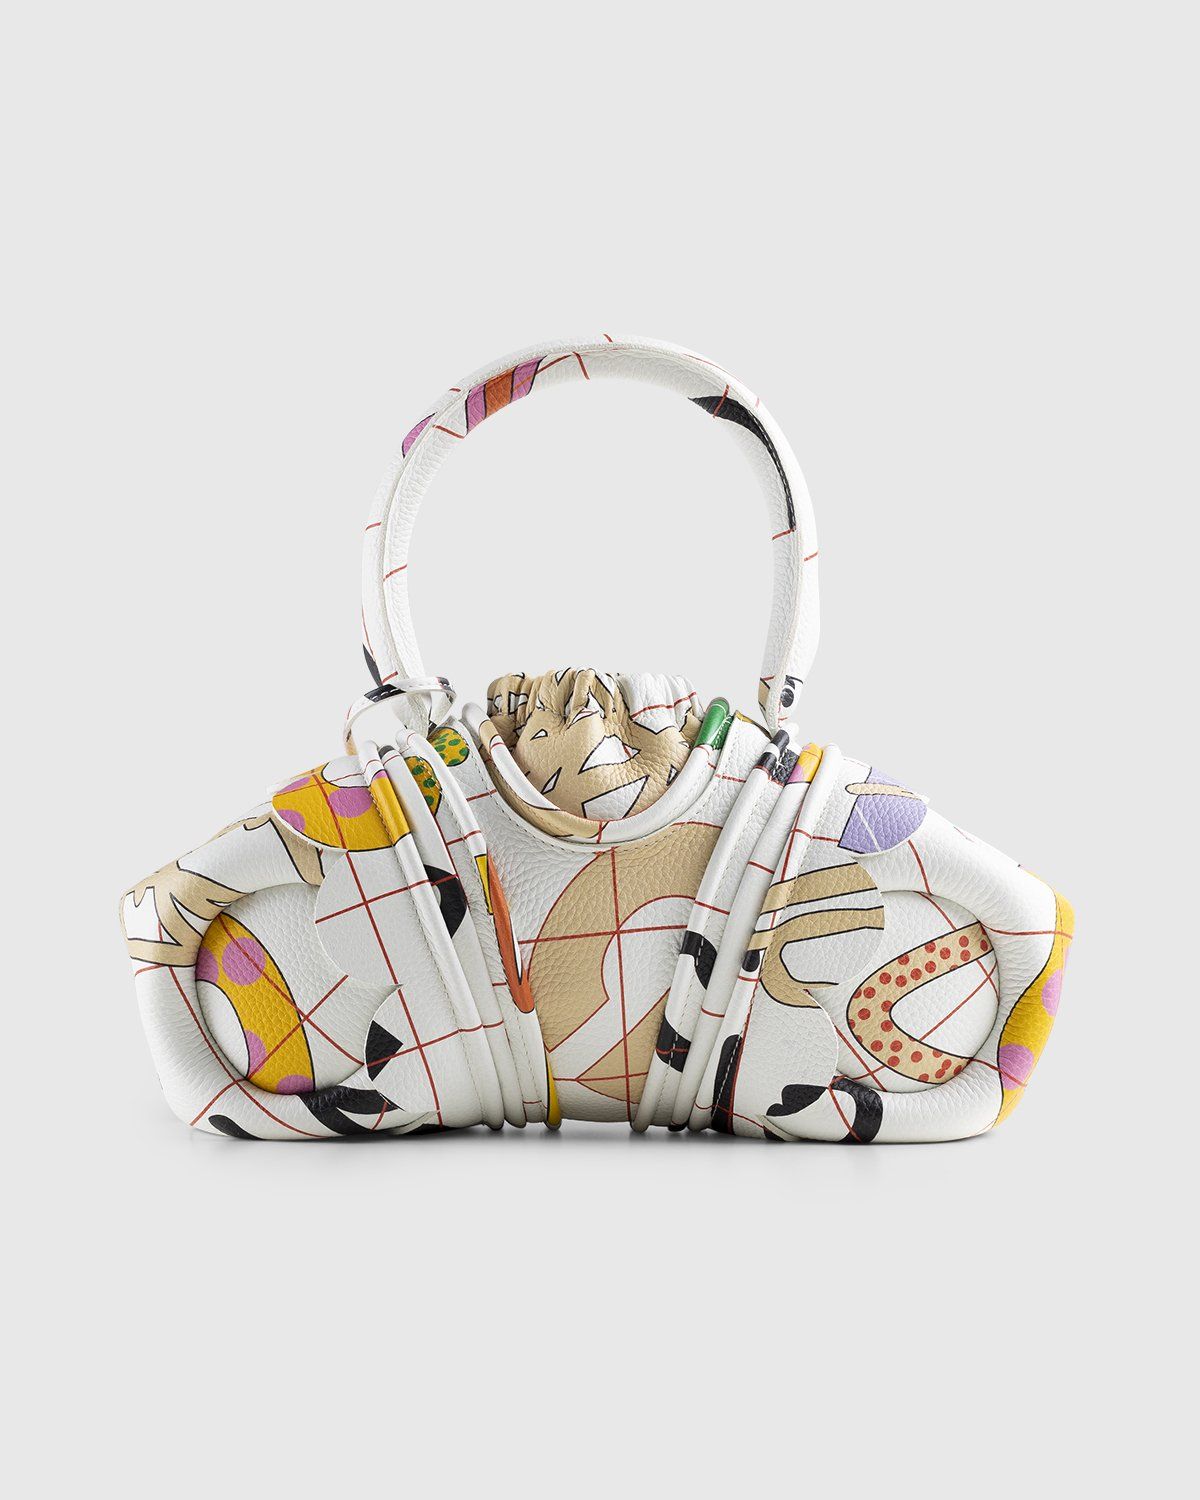 Nora Turato x Ecco Leather x Nicchi x Highsnobiety – Boomblaster Infinity Pool Dragon Toes Bag - Shoulder Bags - White - Image 2